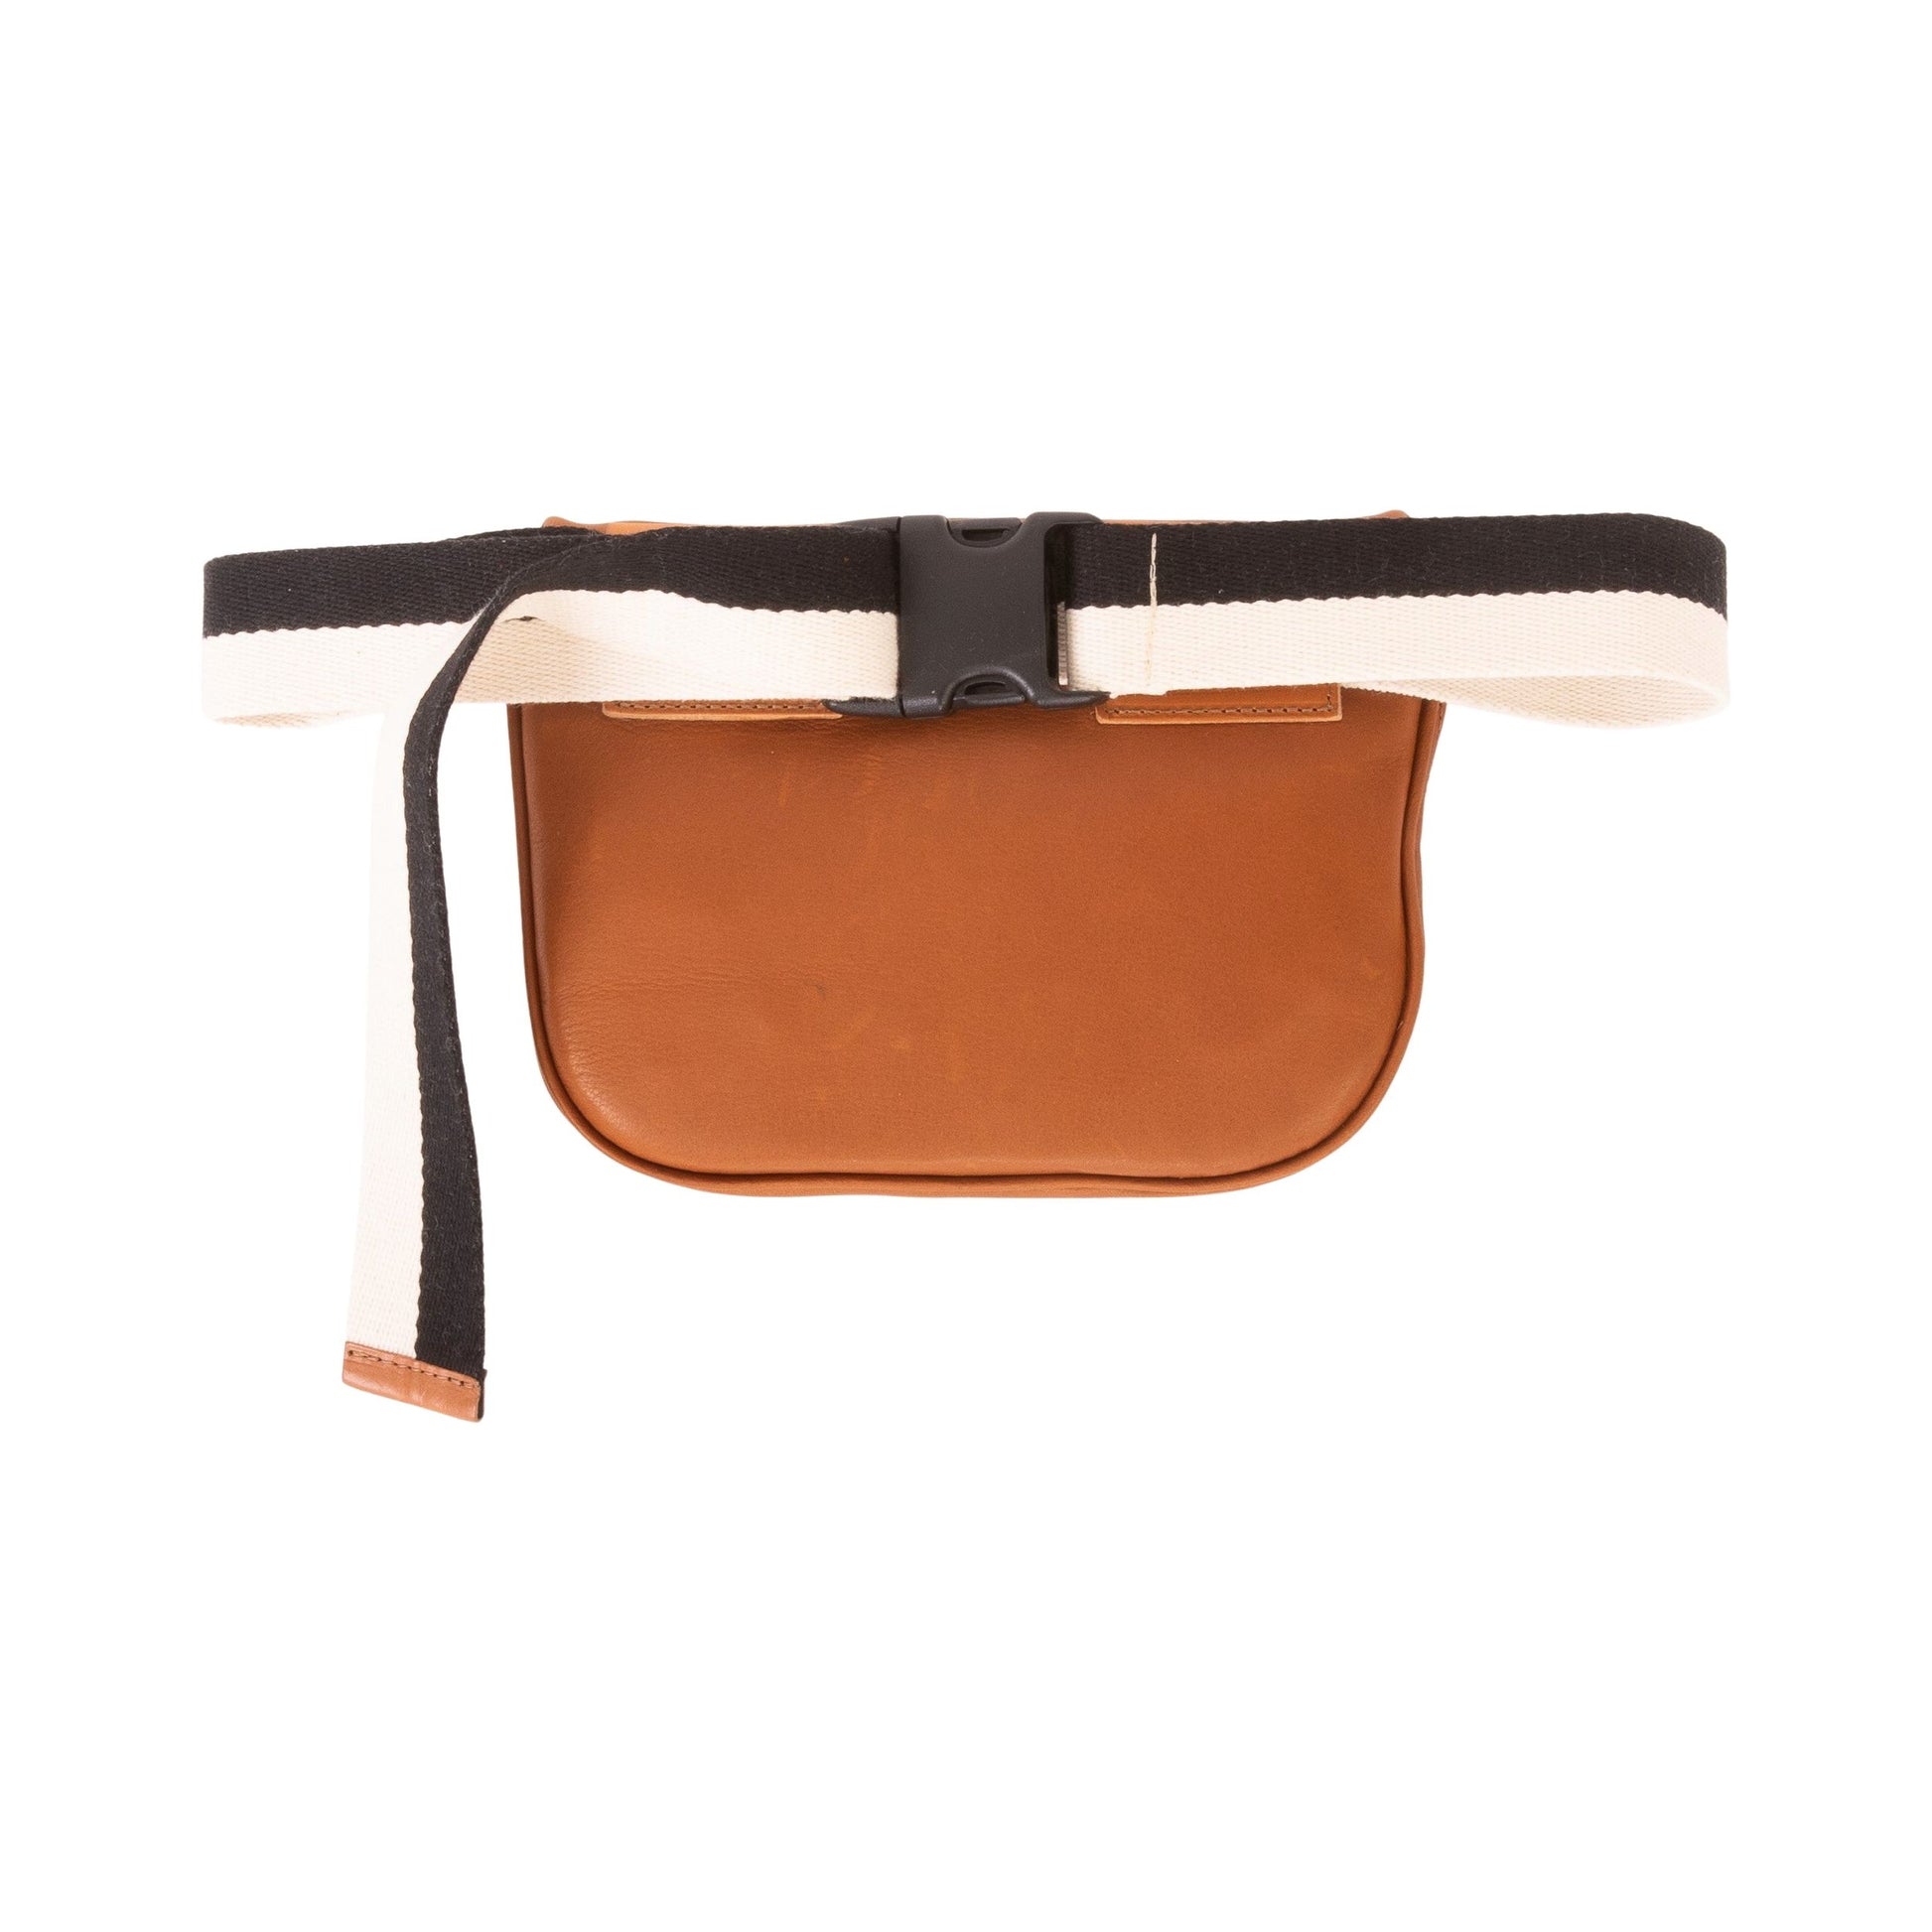 Clare V W Bags Clare V x Westerlind Collaboration Fanny Pack Only